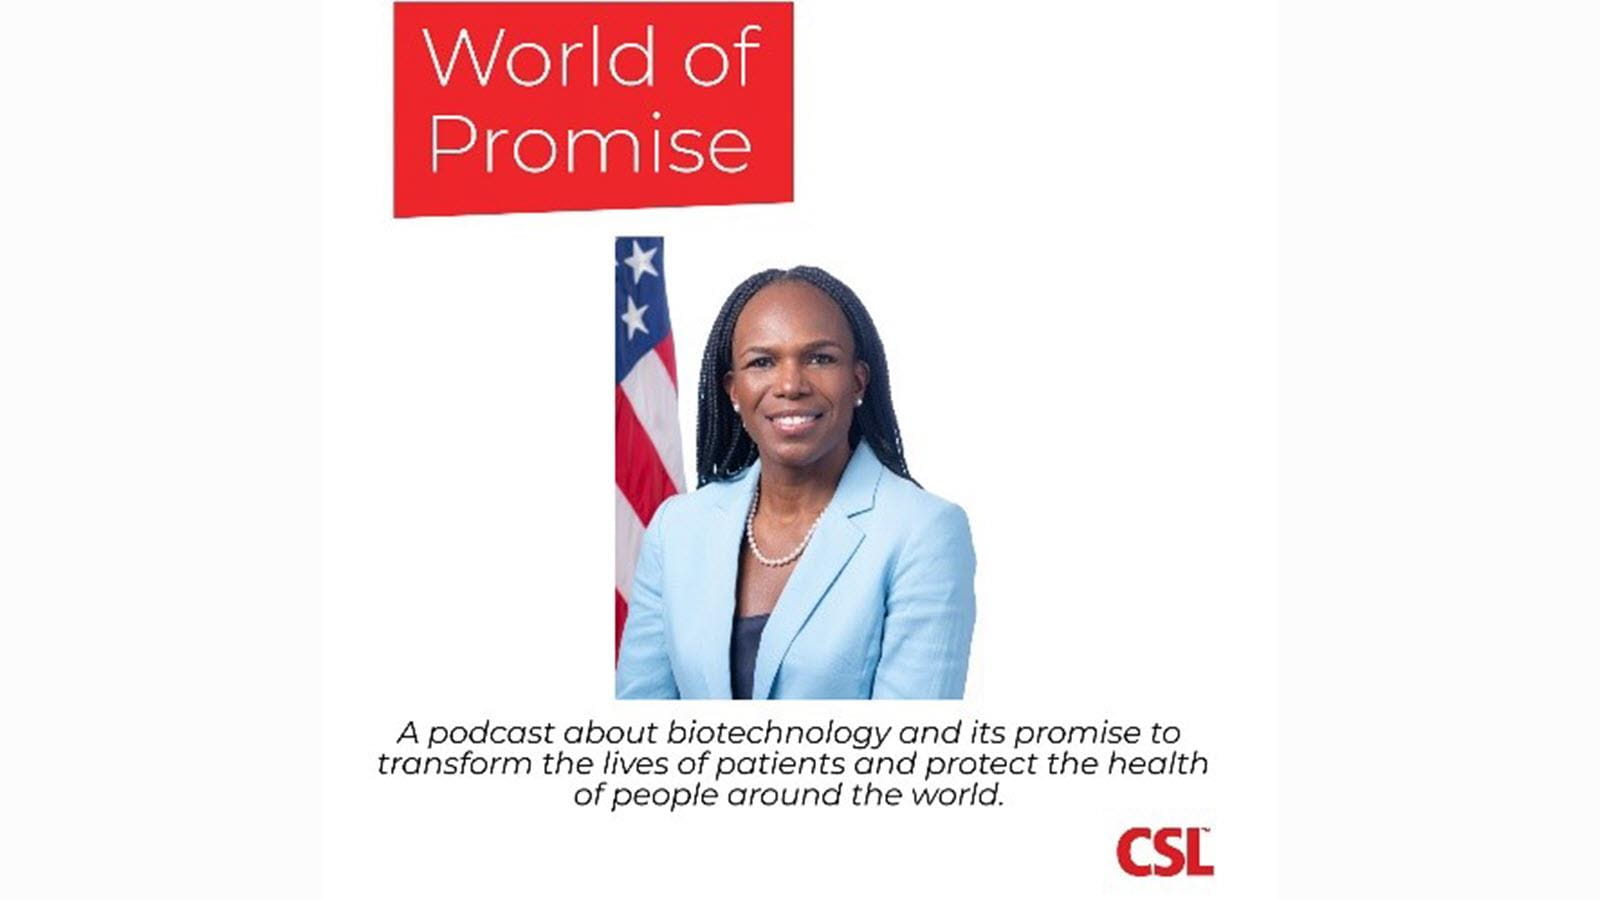 Dr. Ala Stanford visits the World of Promise podcast